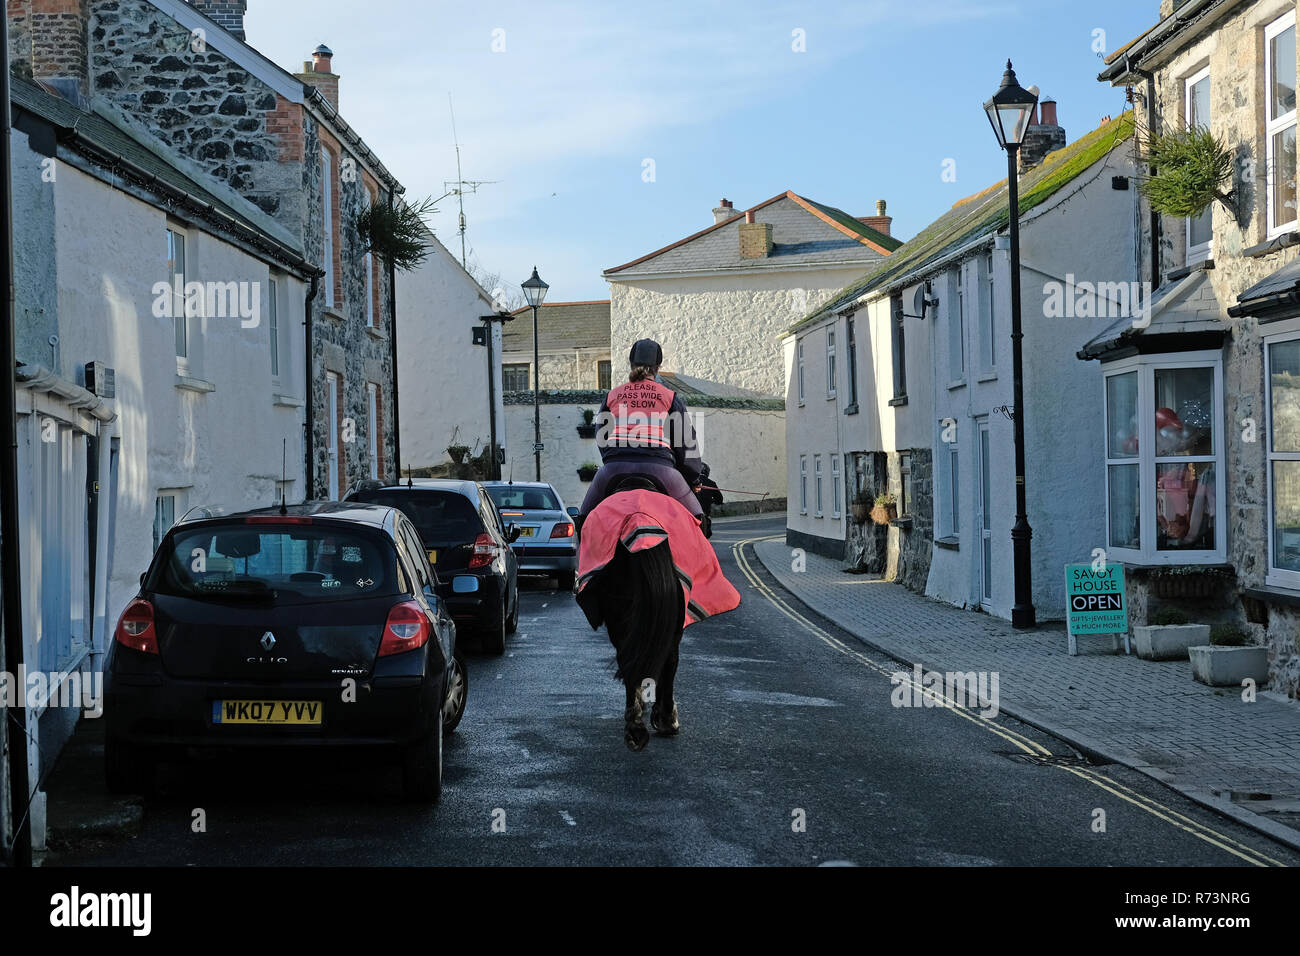 A horse and rider in a small village in Cornwall. Stock Photo